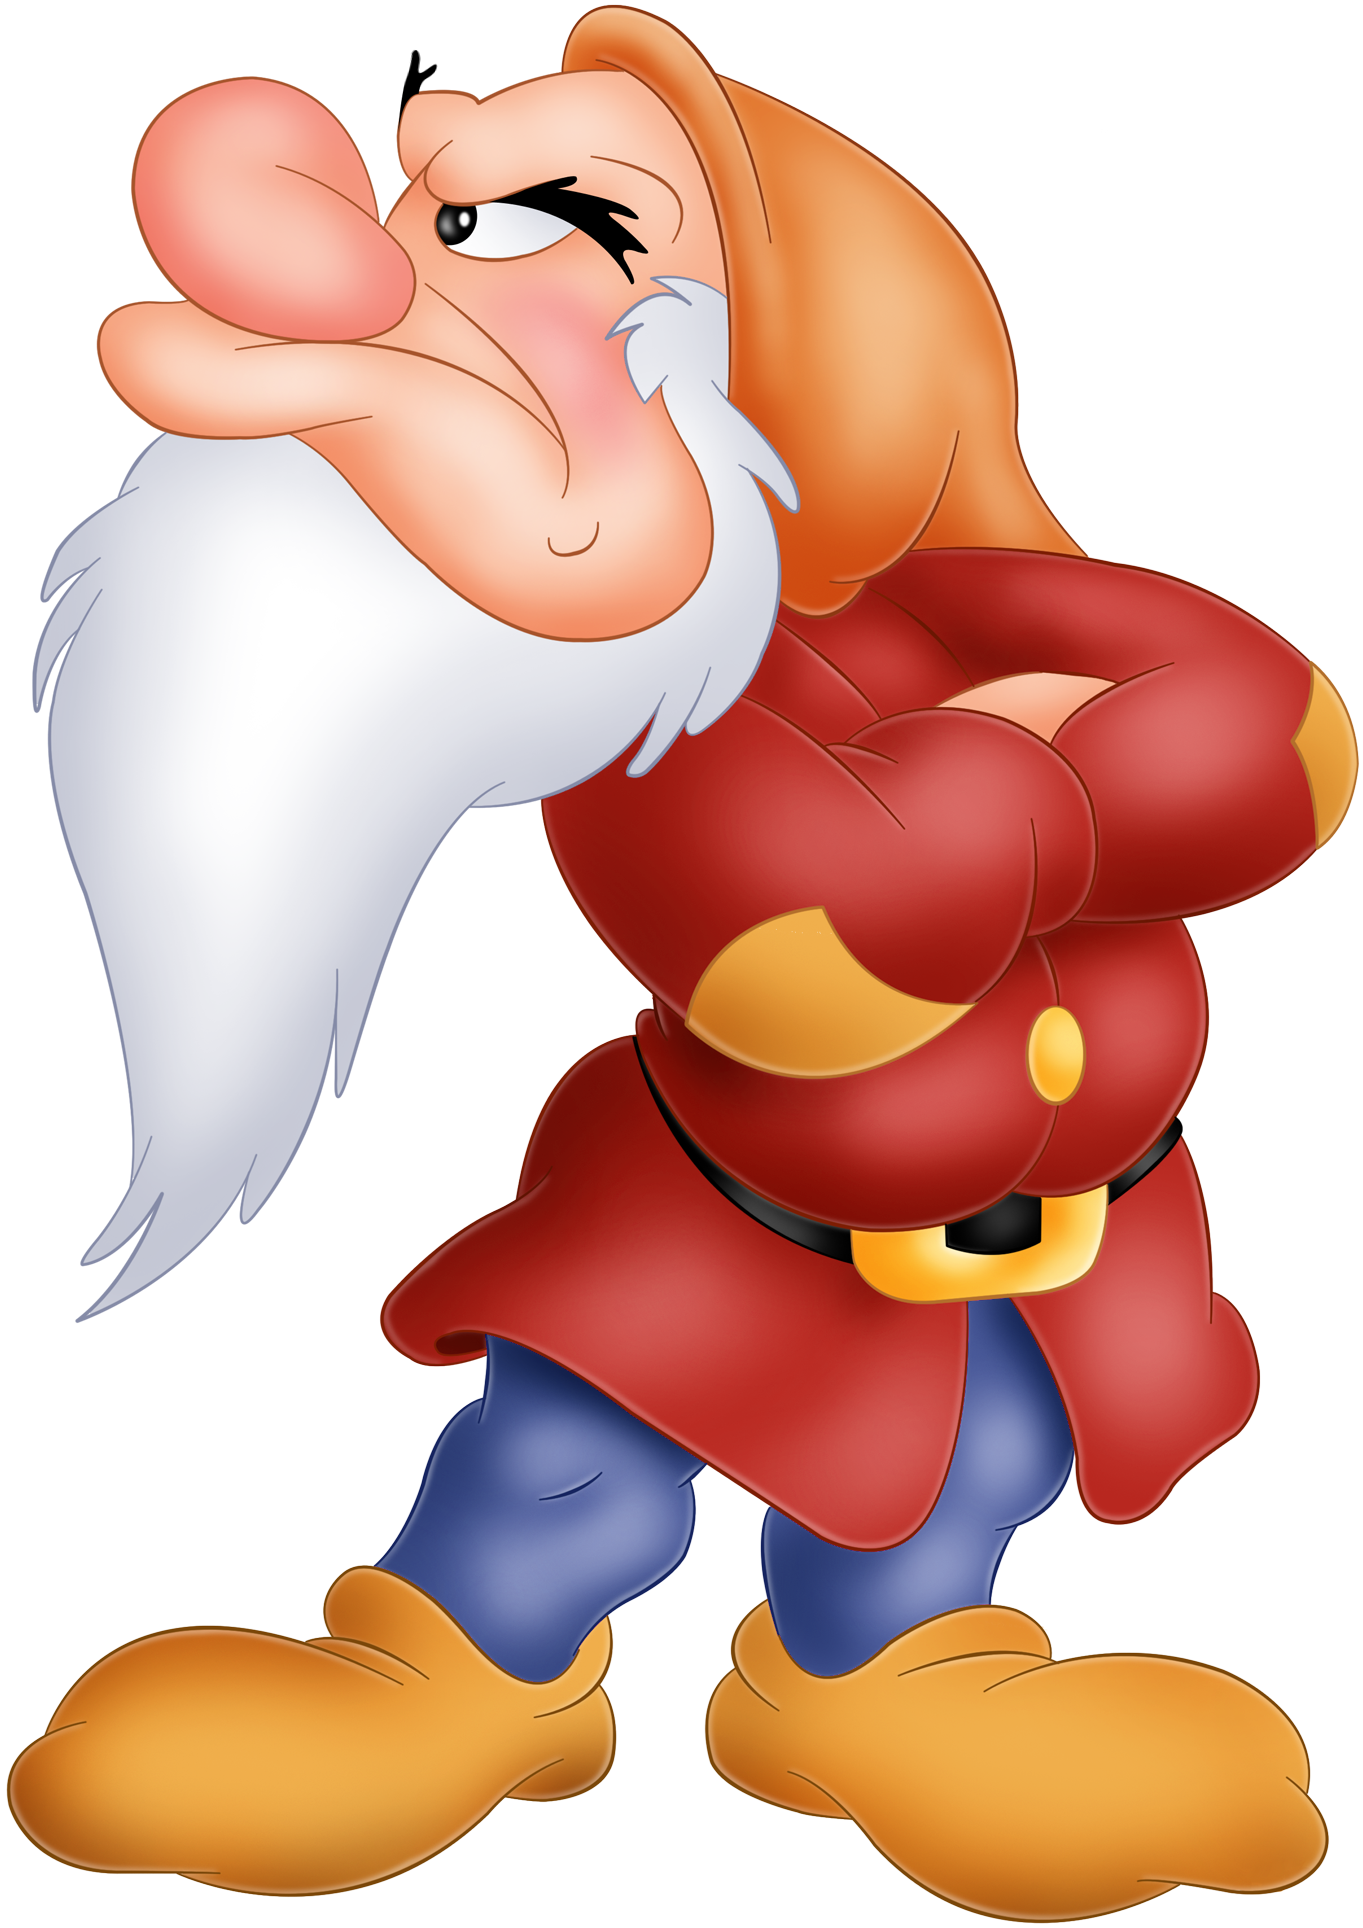 Download and share clipart about Grumpy Snow White Dwarf Png Image - Grumpy Snow ...